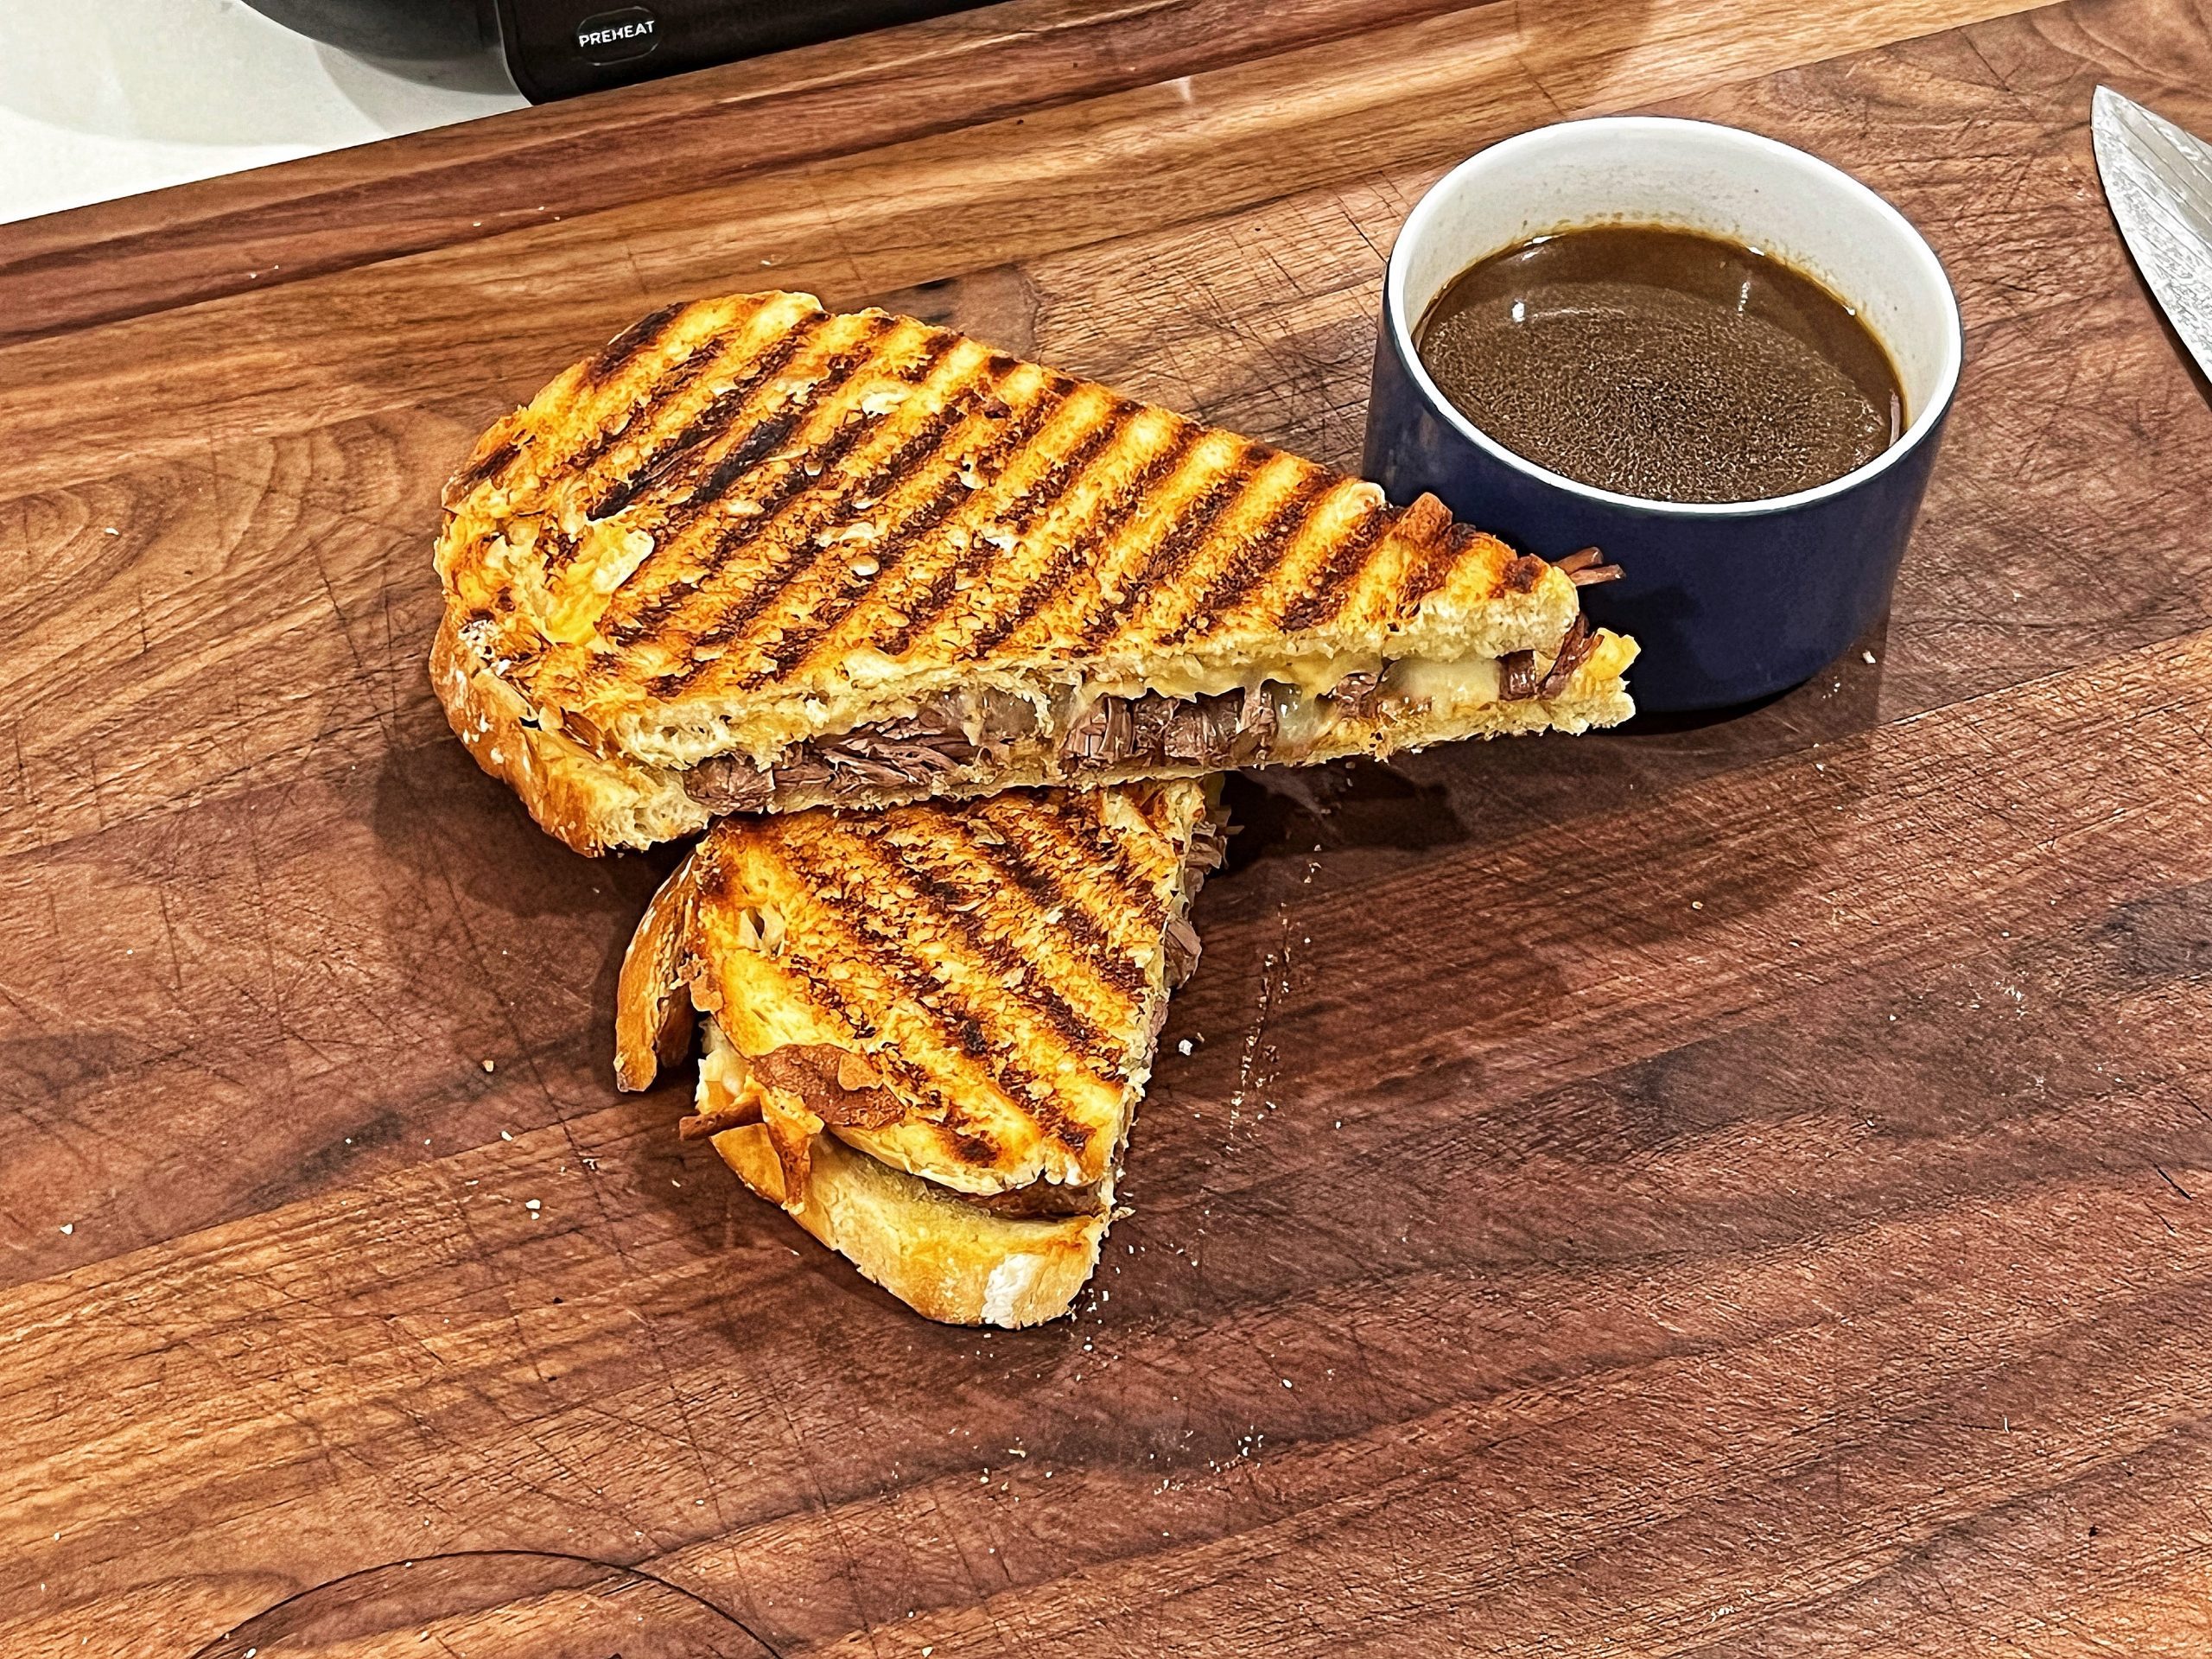 https://www.cookingwithcj.com/wp-content/uploads/2022/08/Panini-scaled.jpg